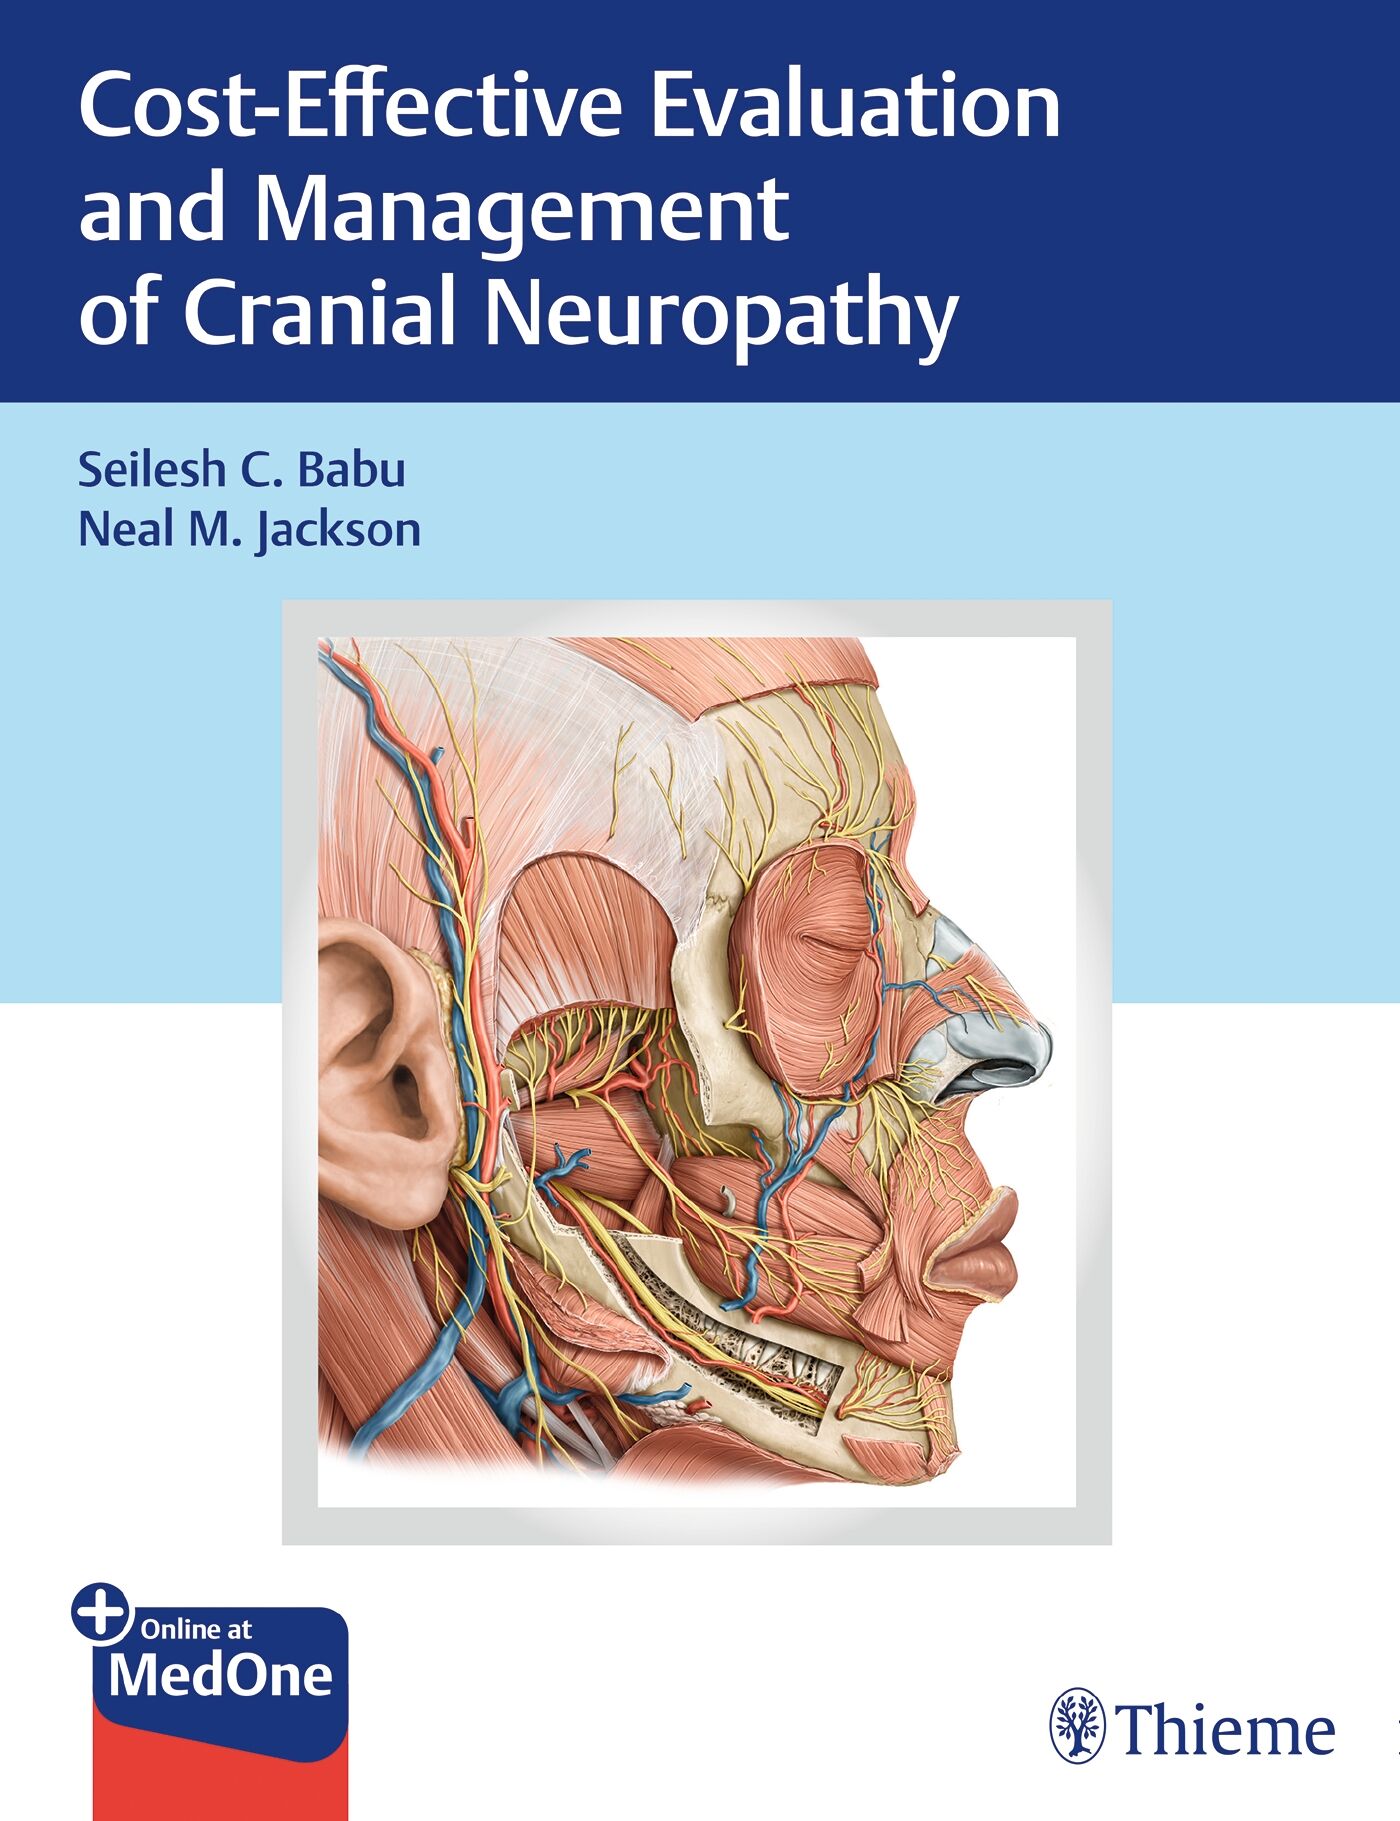 Cost-Effective Evaluation and Management of Cranial Neuropathy, 9781684200207